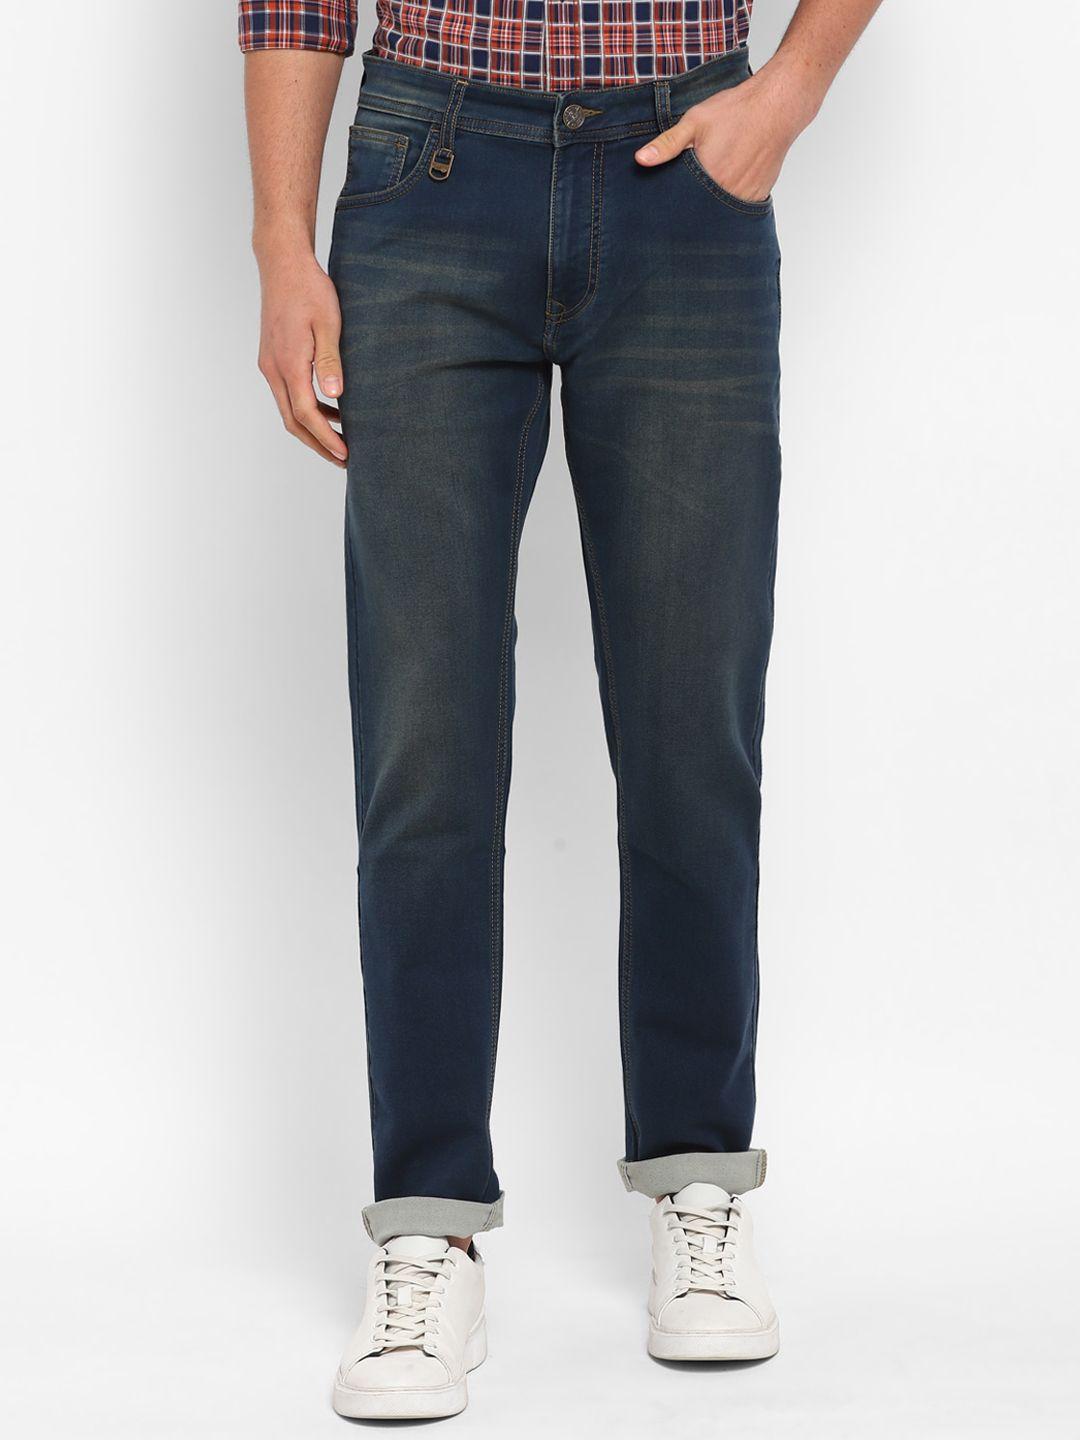 red-chief-men-blue-light-fade-jeans